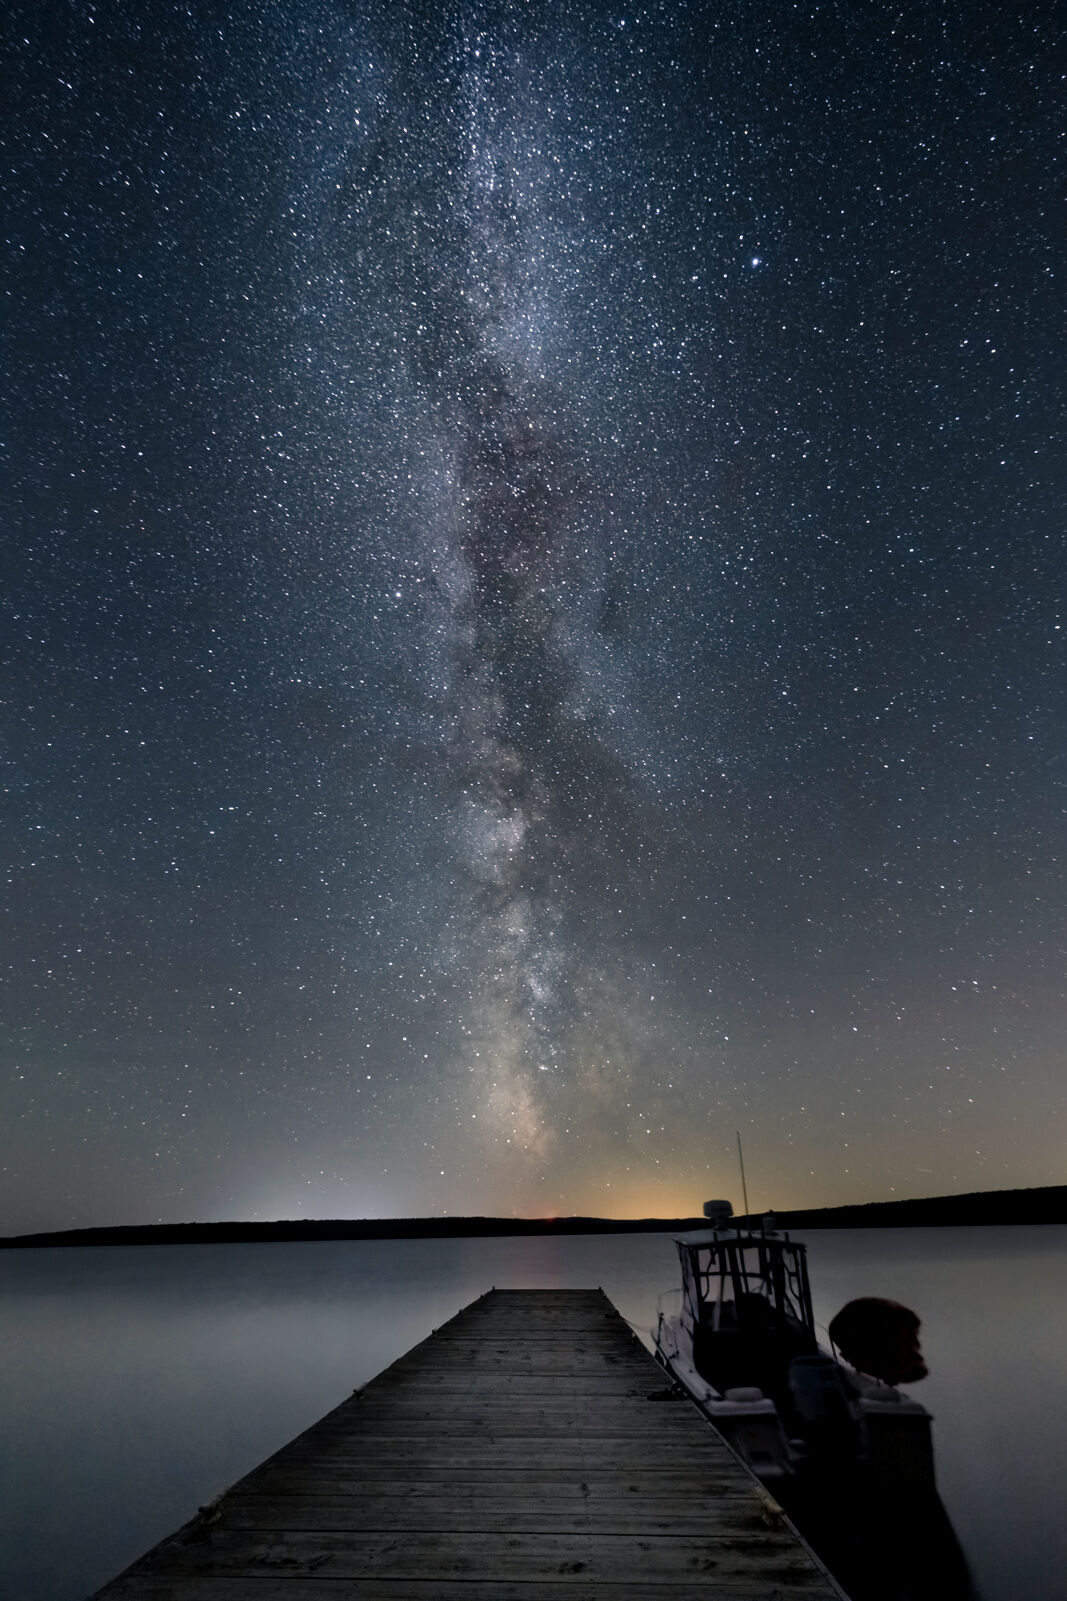 milky way in the night sky with a dock and boat in the foreground